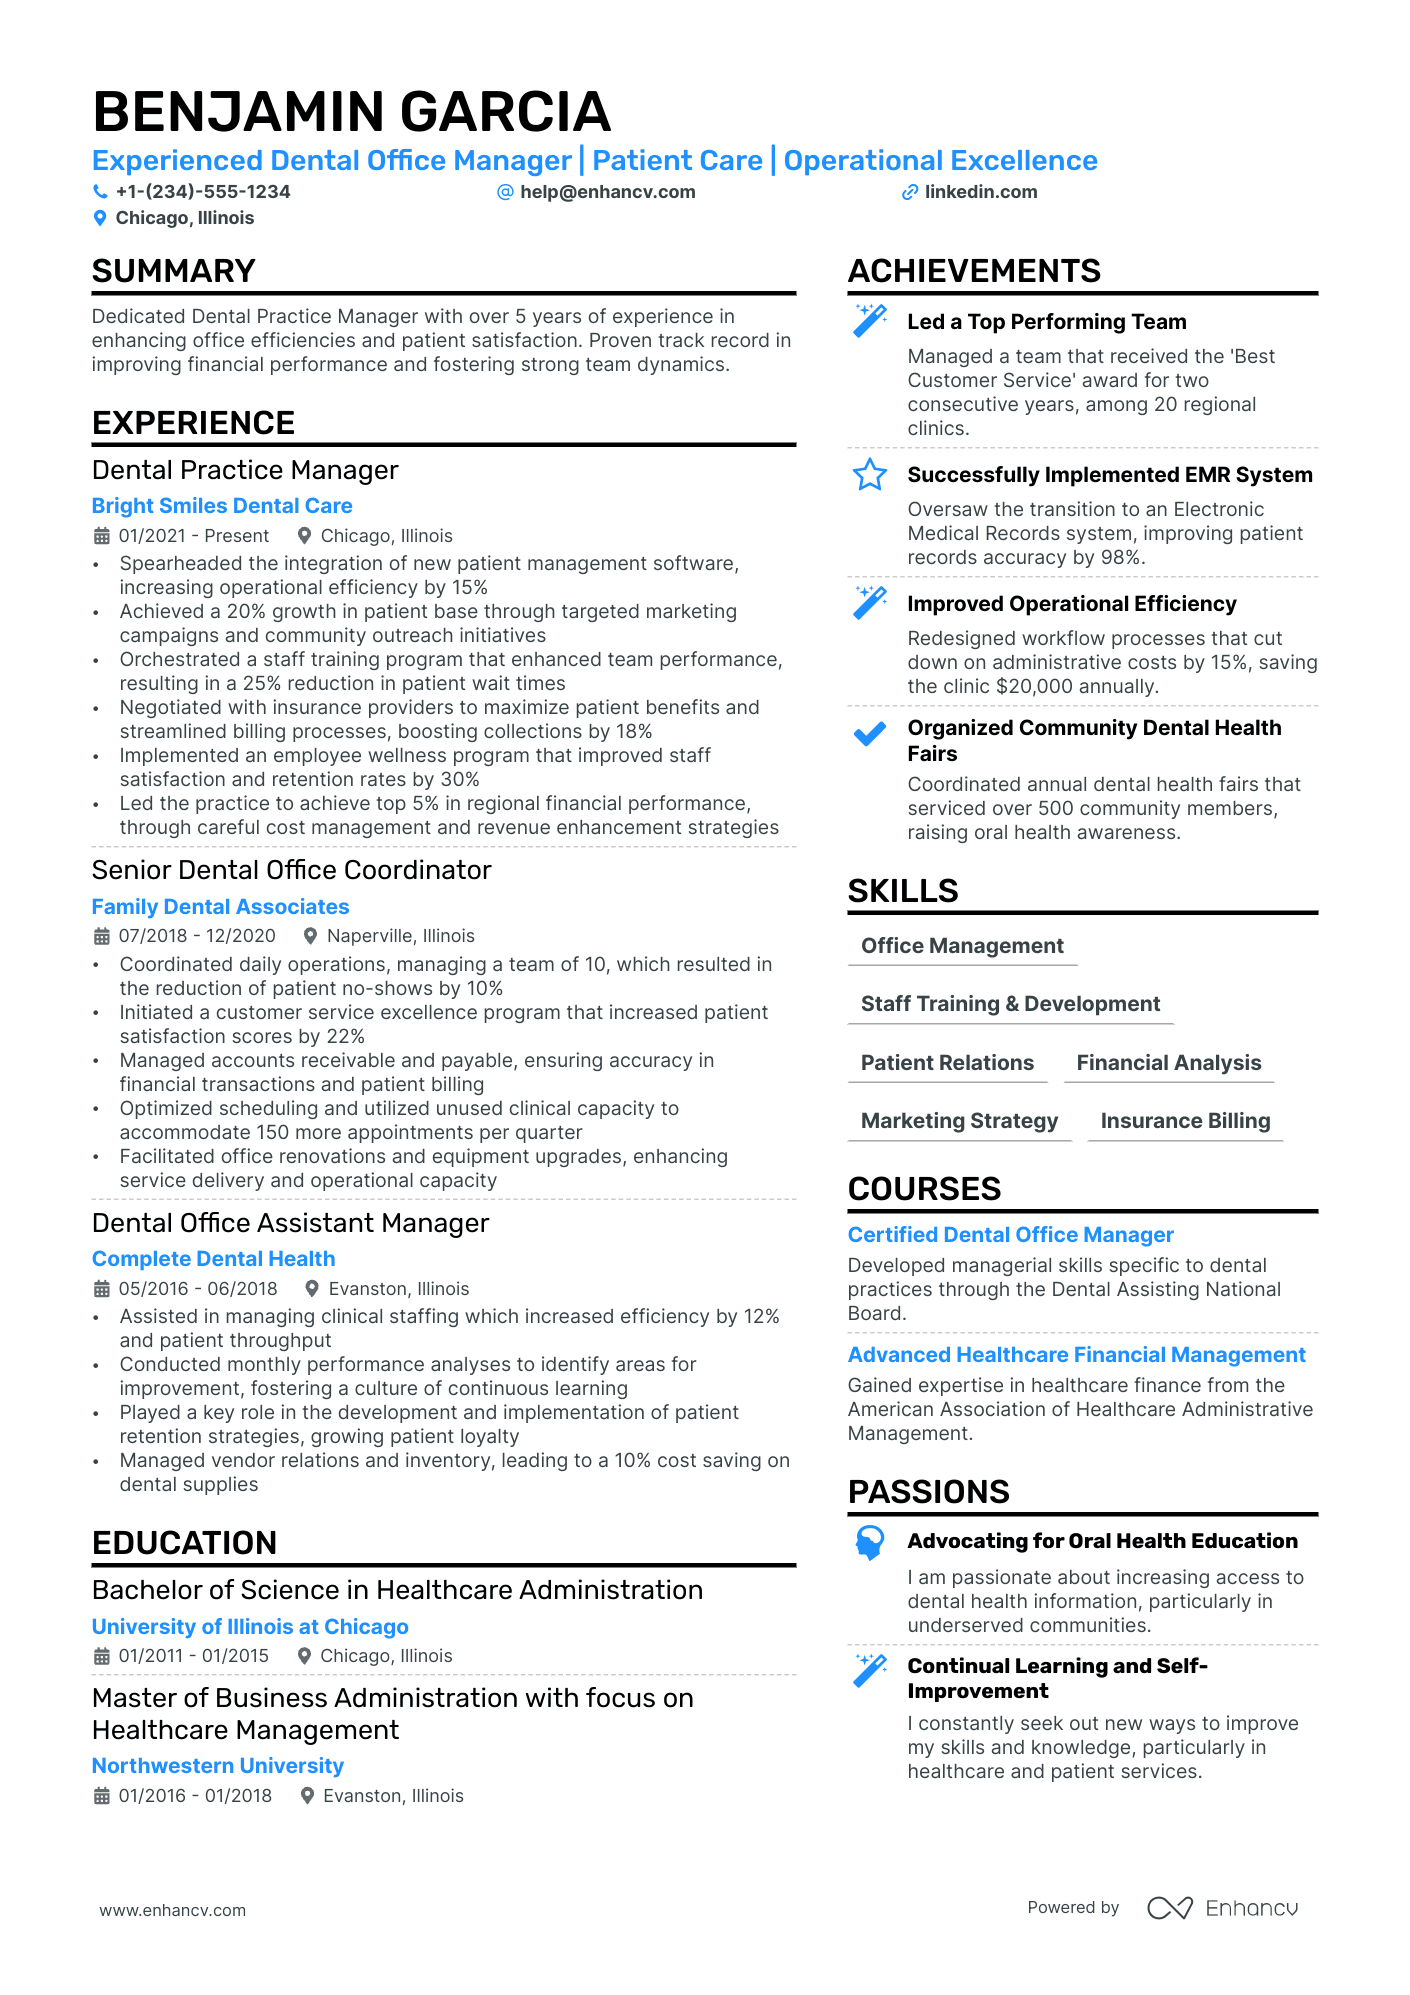 sample resume office manager